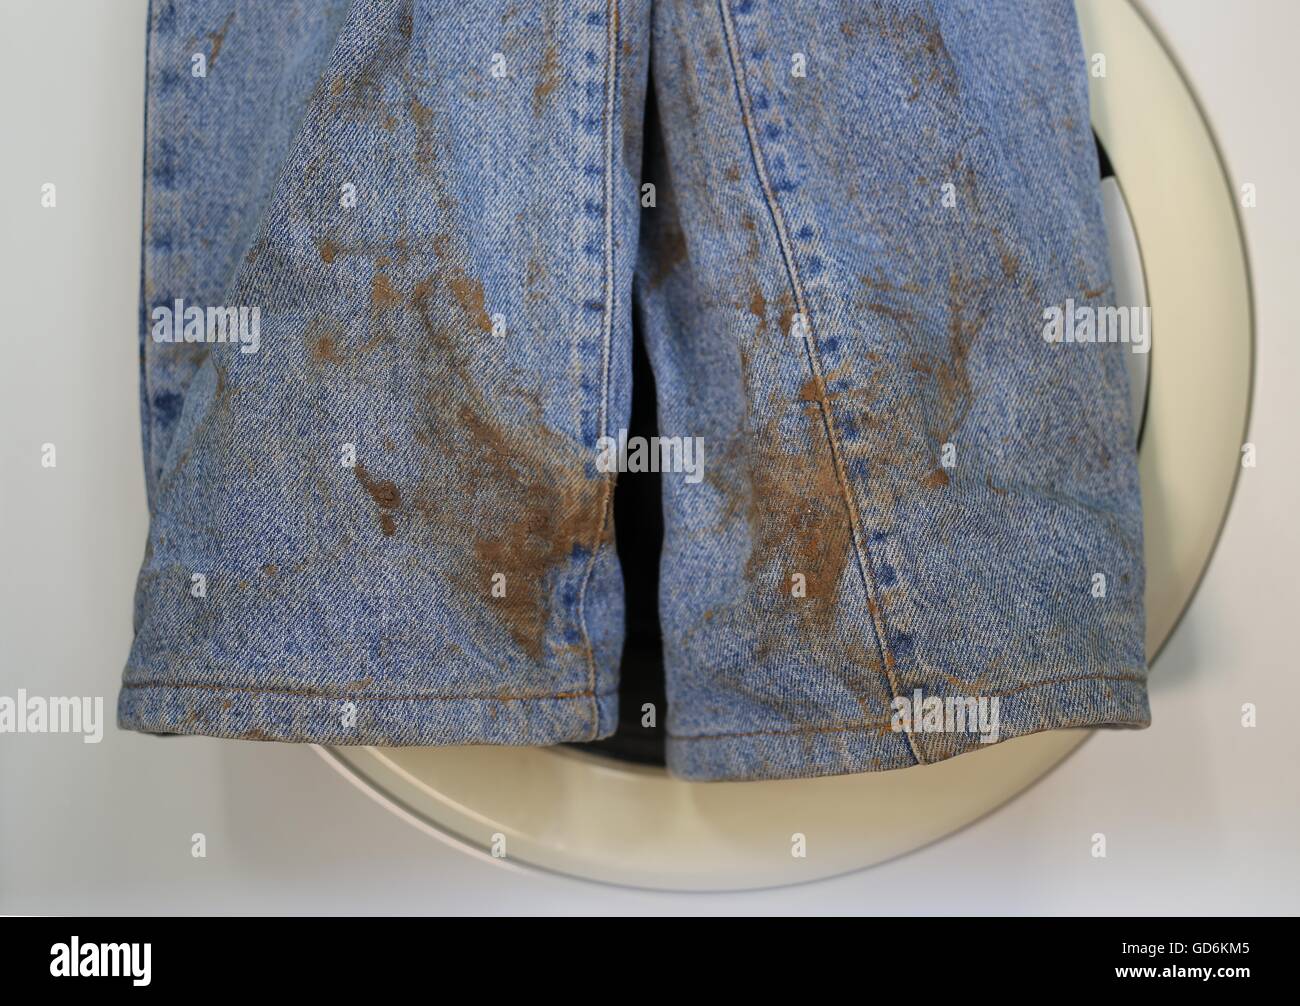 Stained Jeans. Muddy jeans on a washing machine. Mud stain on jeans. Stained jeans before laundry. Metaphore for embarrassment, guilt, shame. Stock Photo